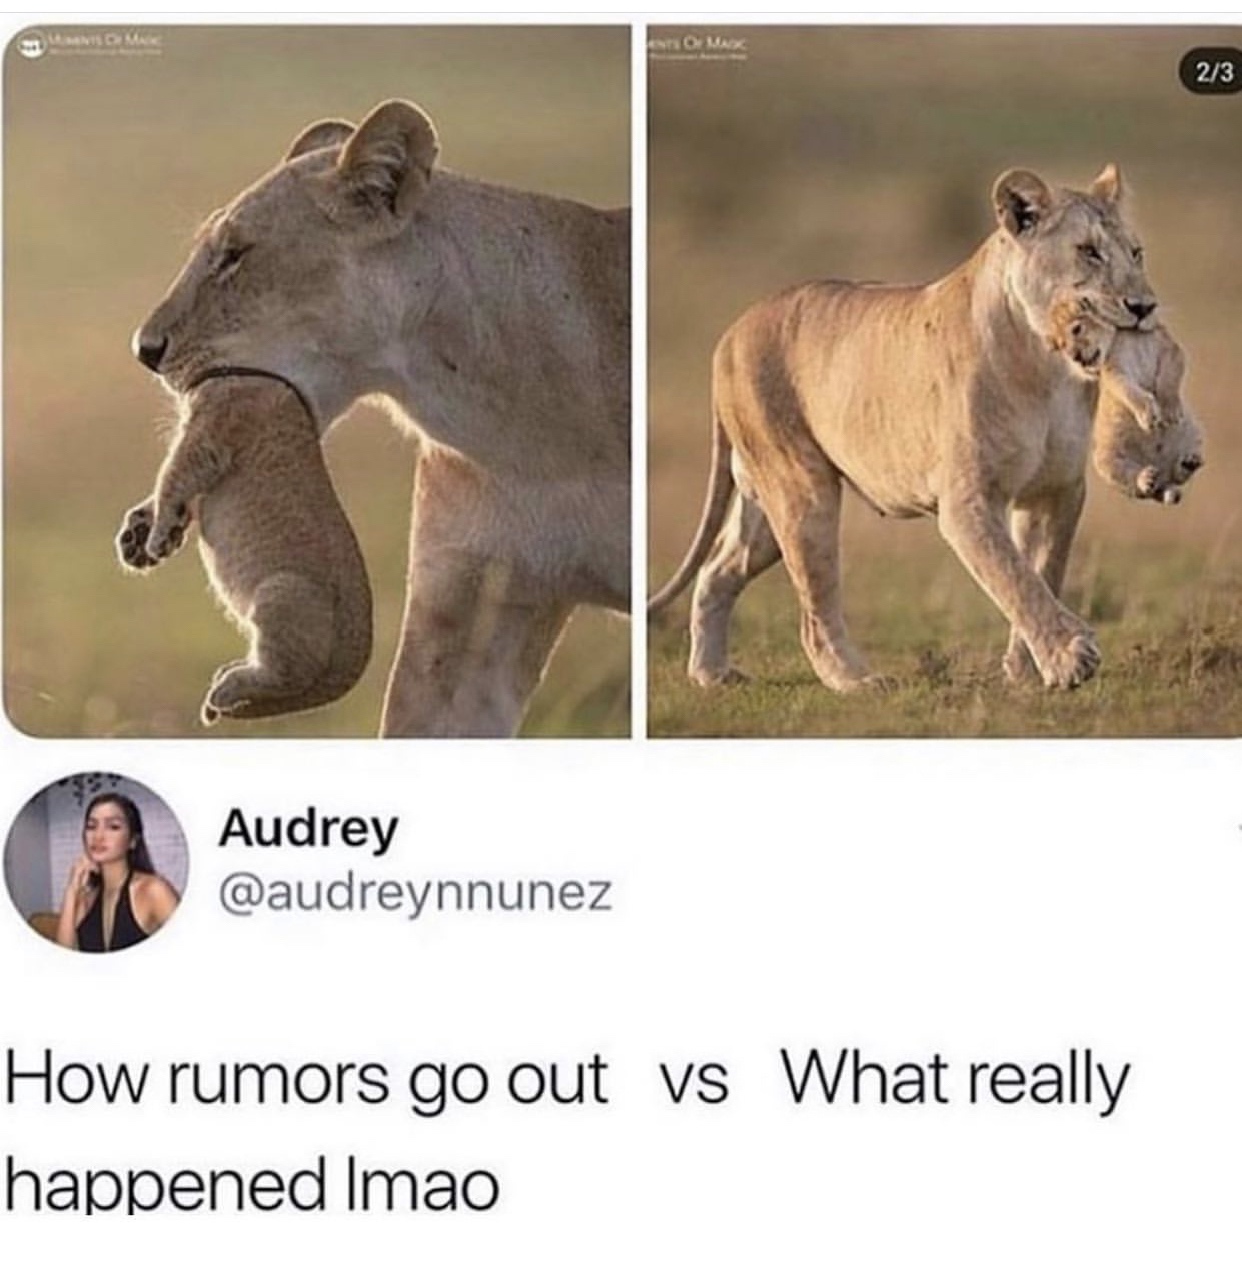 engineering drawing meme - 23 Audrey How rumors go out vs What really happened Imao